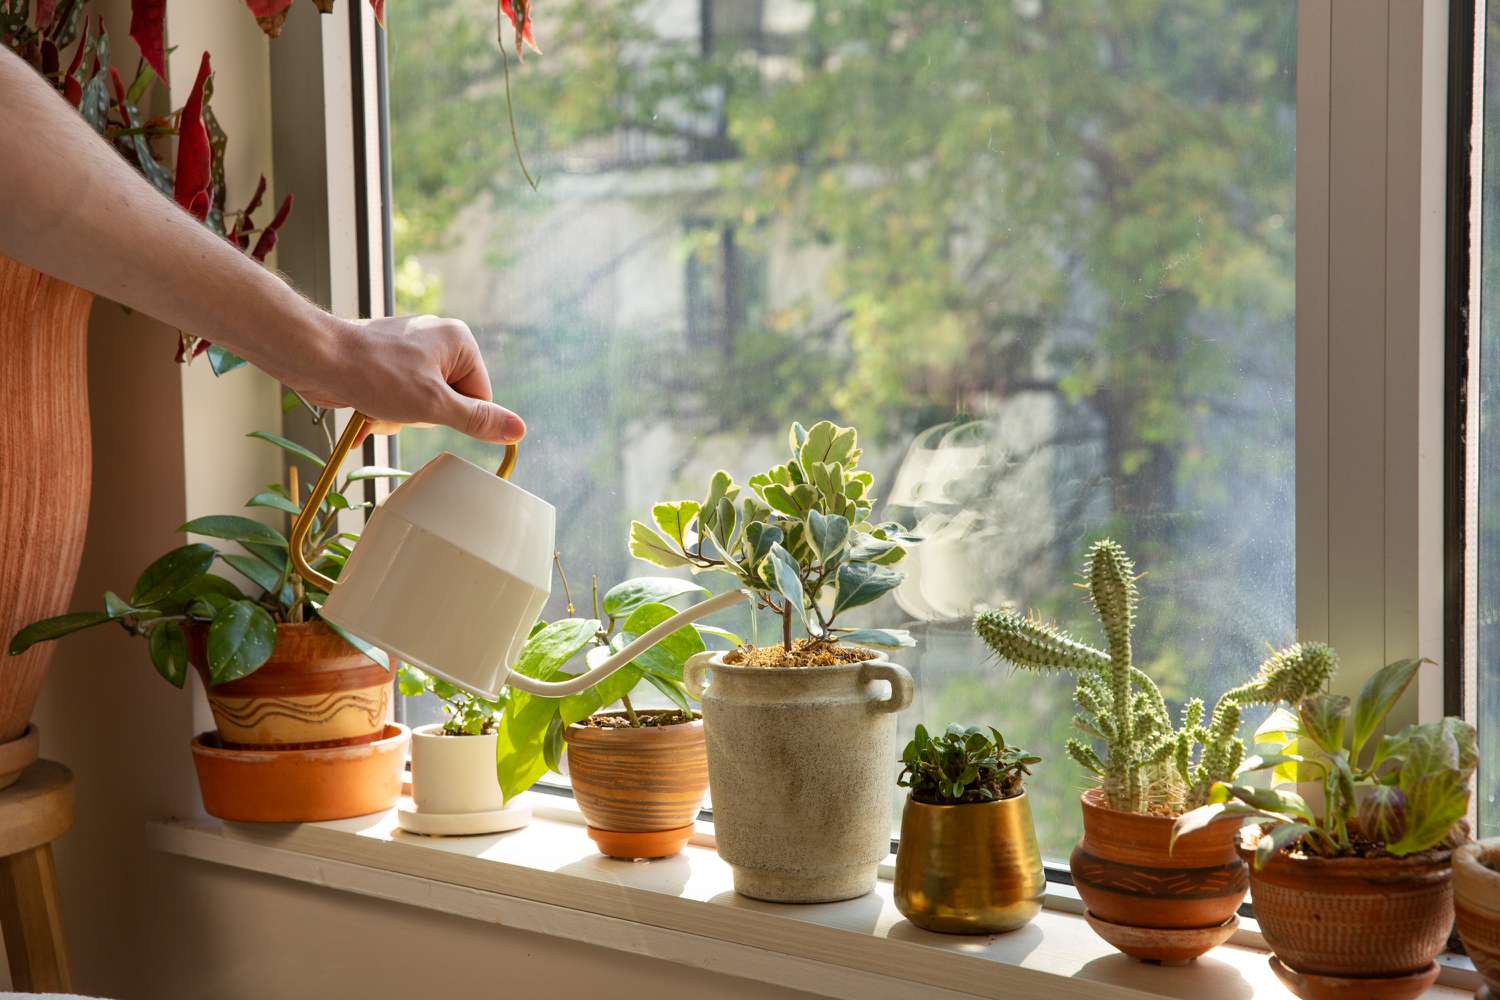 Maintain a Schedule for Watering the Plants